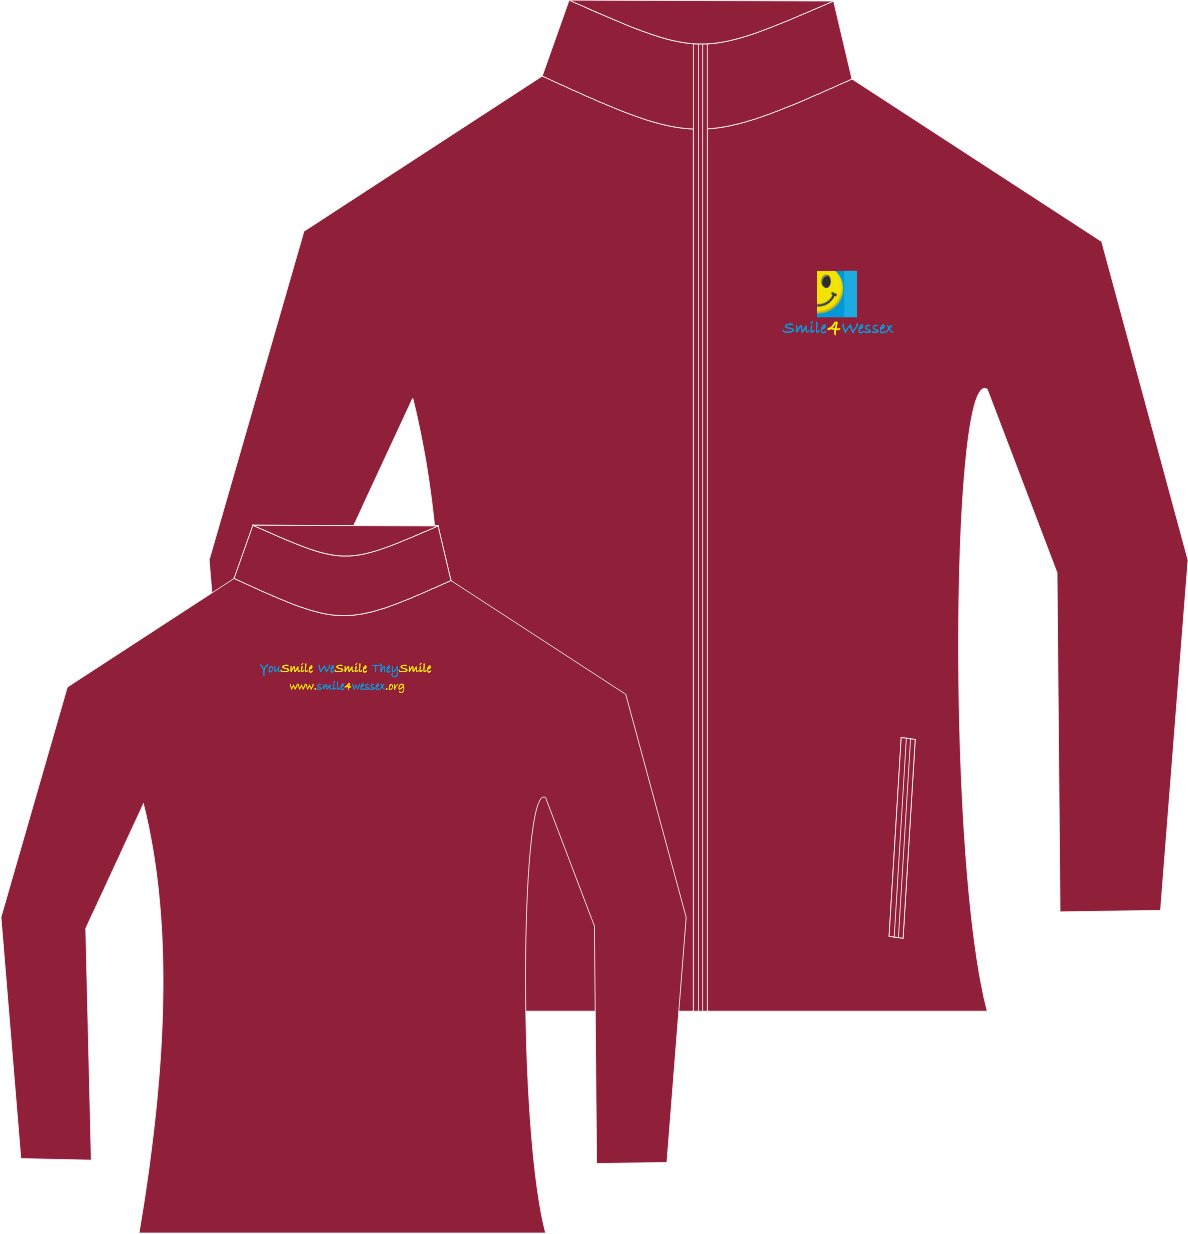 Made from 280gsm Polyester Microfibre, with
full length zips and two zipped pockets, these
Henbury Micro Fleece Jackets are ideal for 
those chilly evenings. Embroidered Logo/Text.

Please allow 14 days for manufacture & delivery